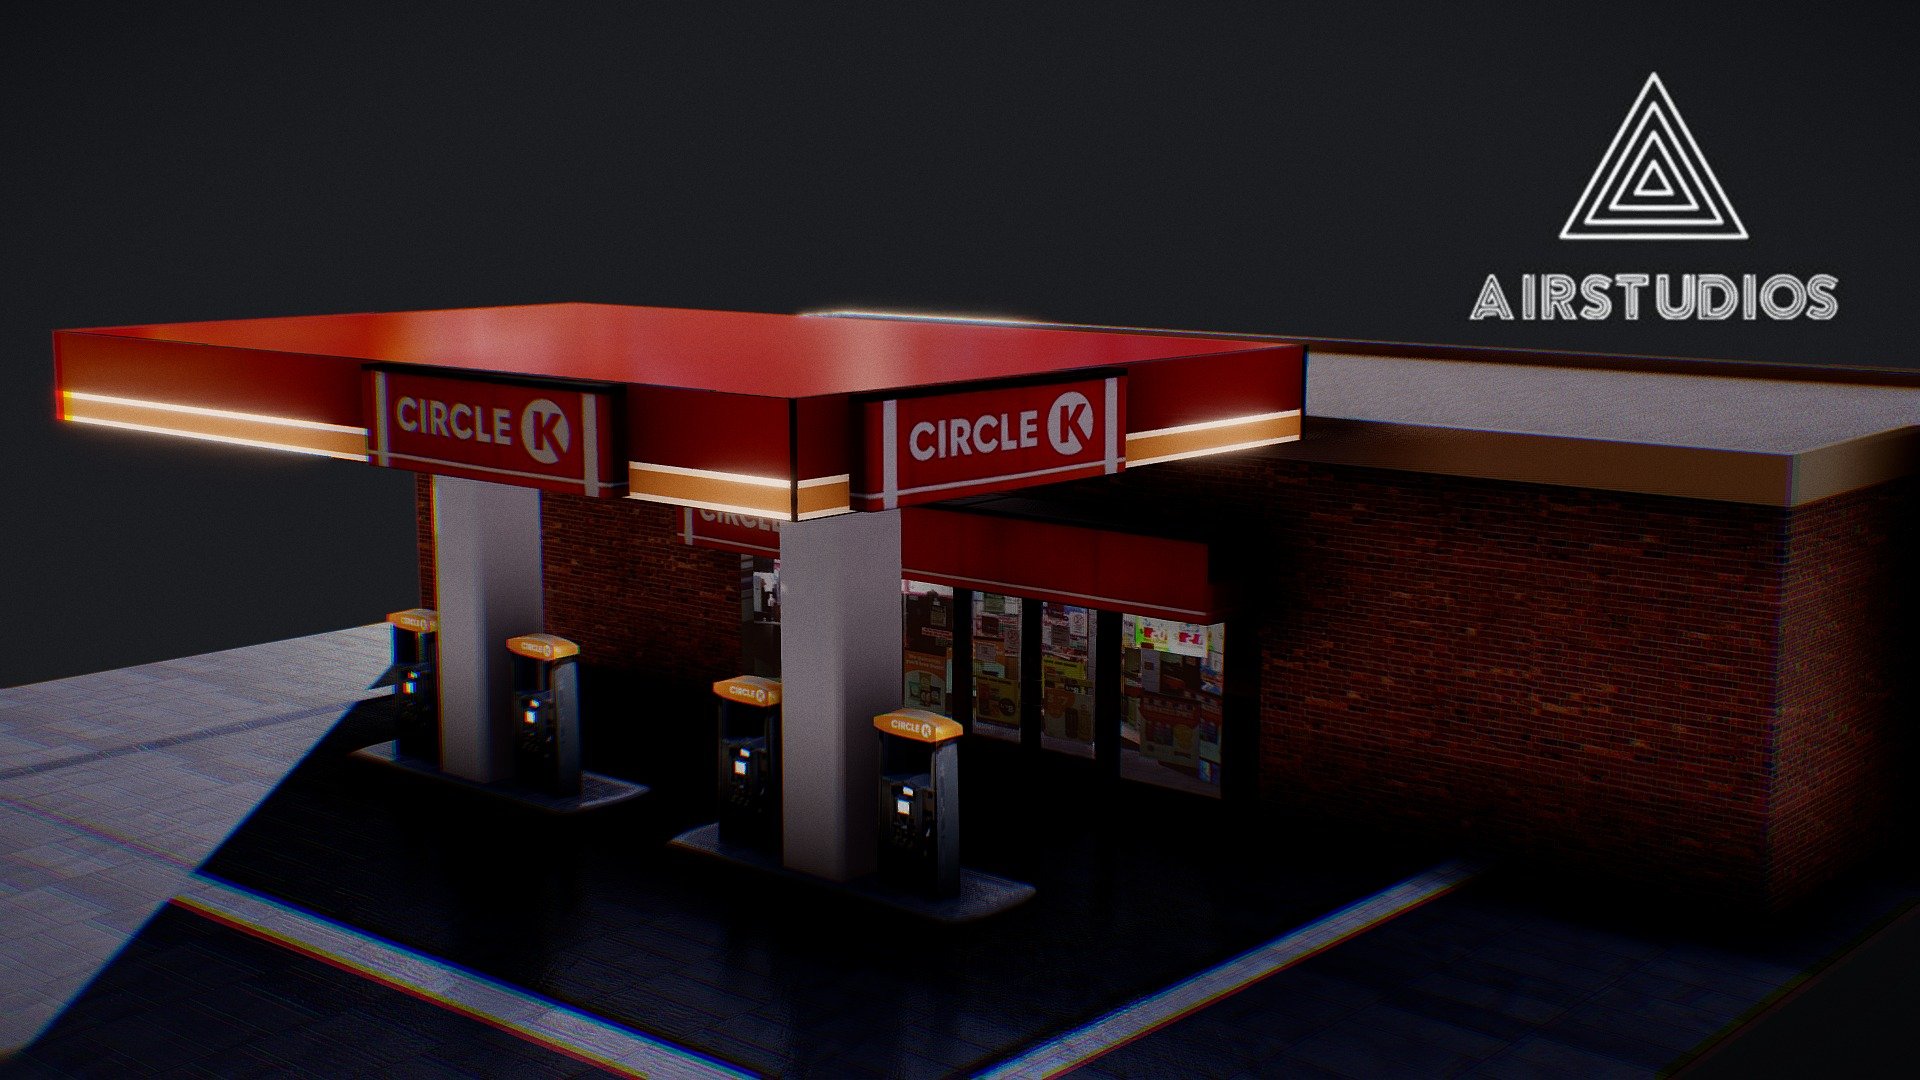 Petrol Gas Station

Made in Blender - Petrol Gas Station Low Poly - Buy Royalty Free 3D model by AirStudios (@sebbe613) 3d model